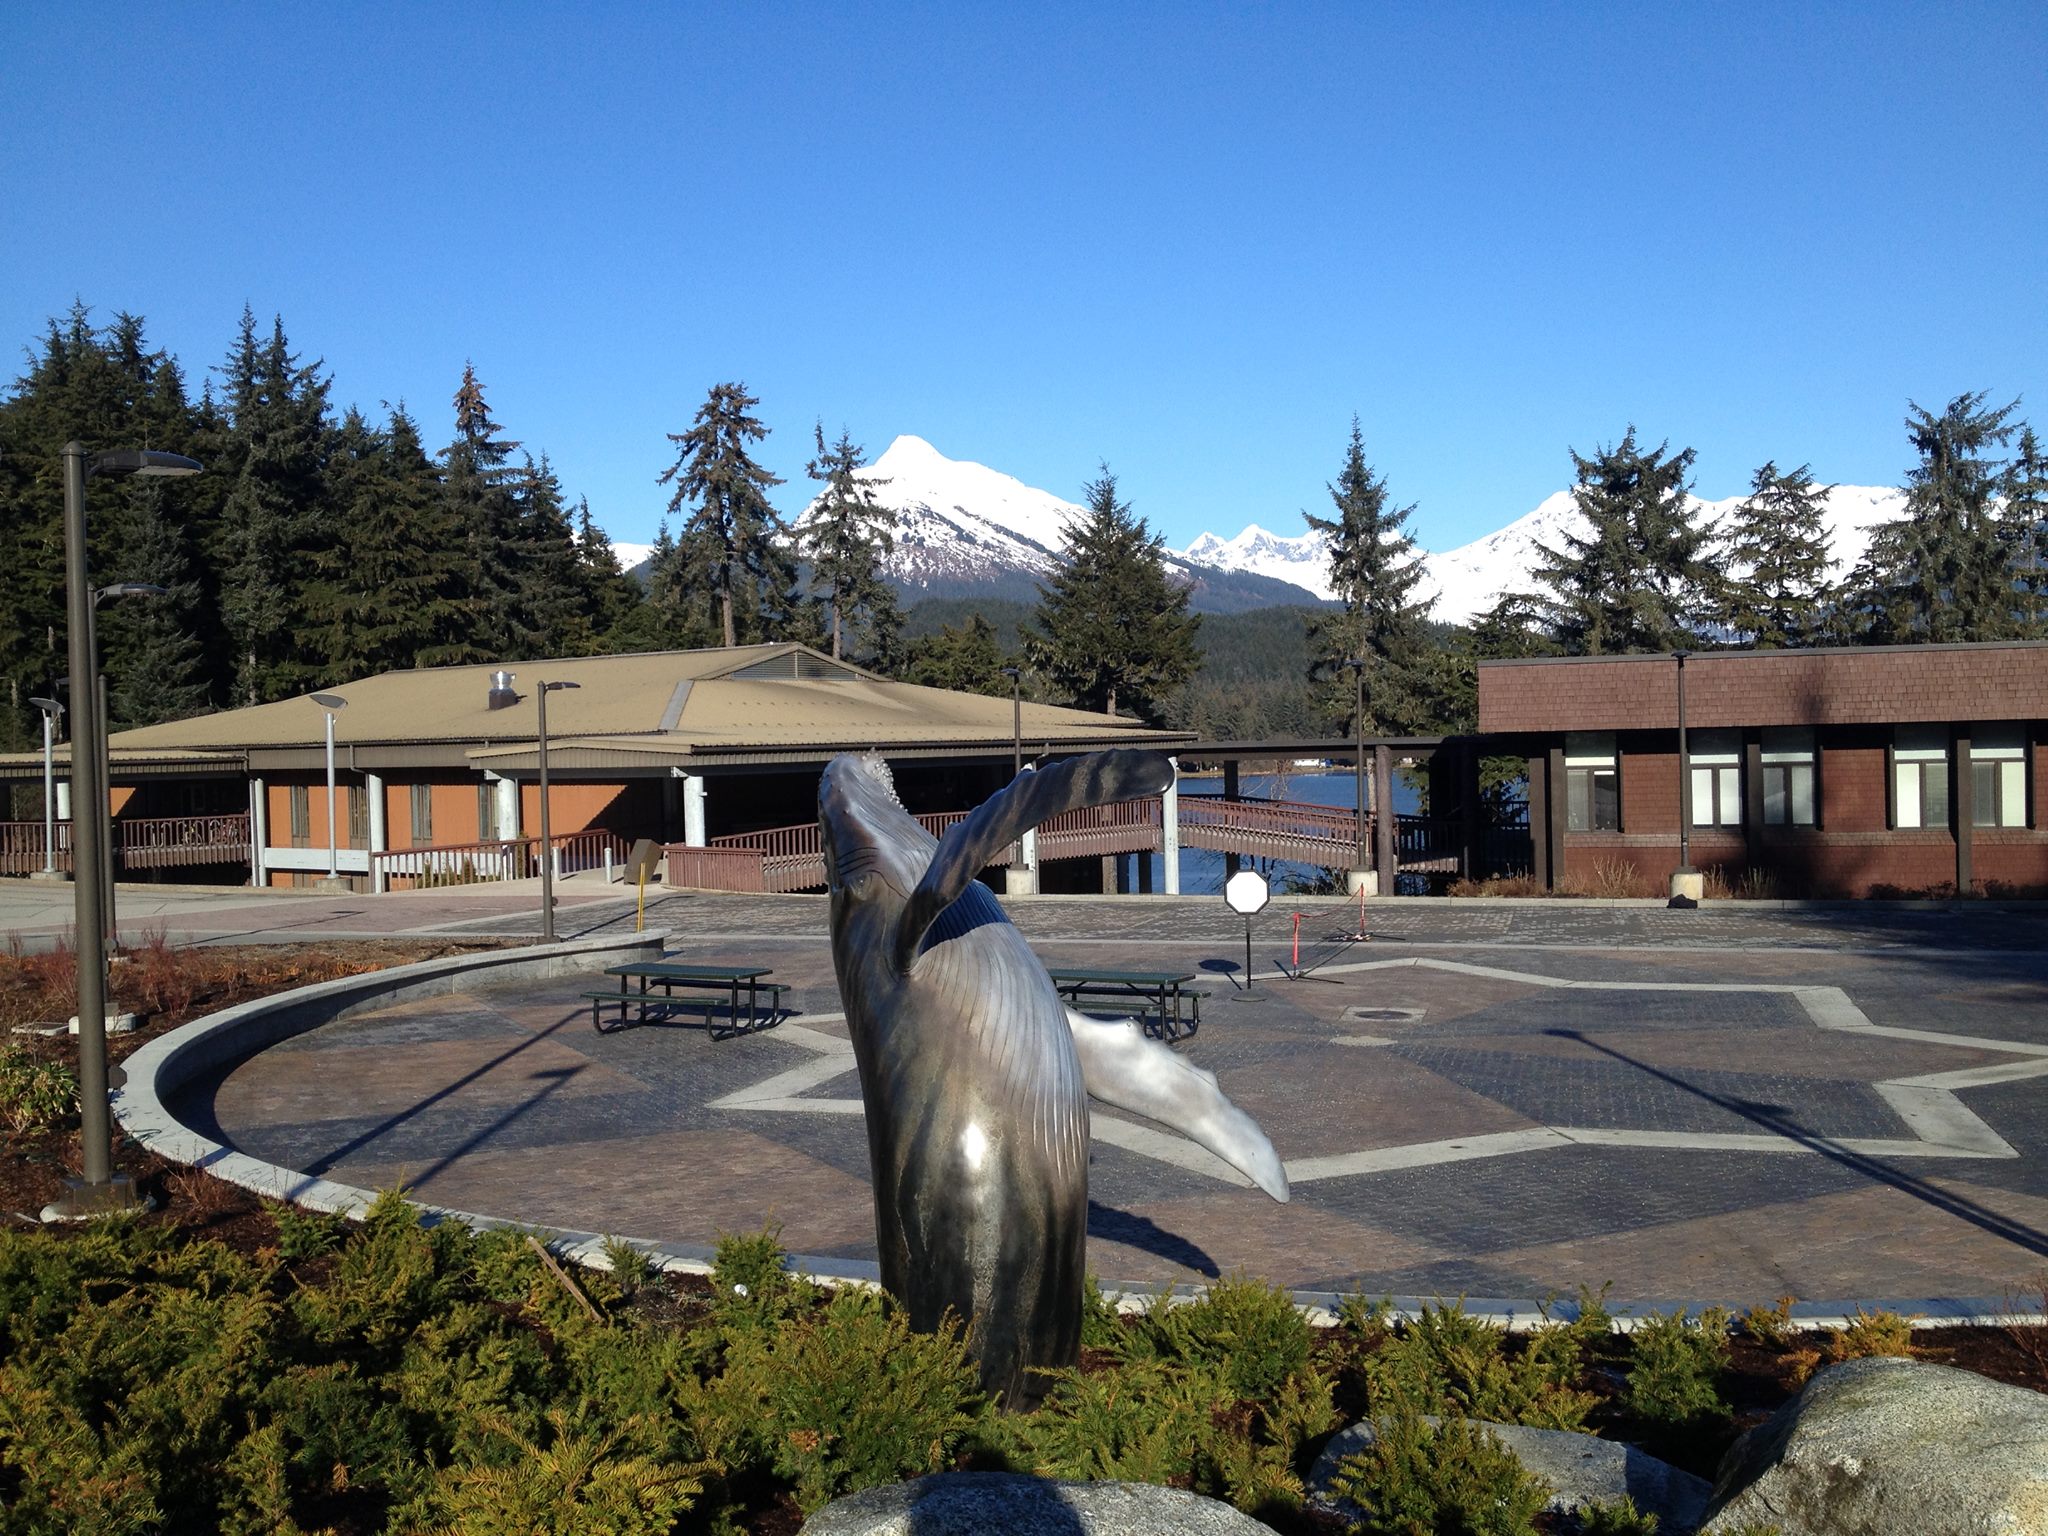 UAS Juneau campus scenic shot with whale sculpture in courtyard